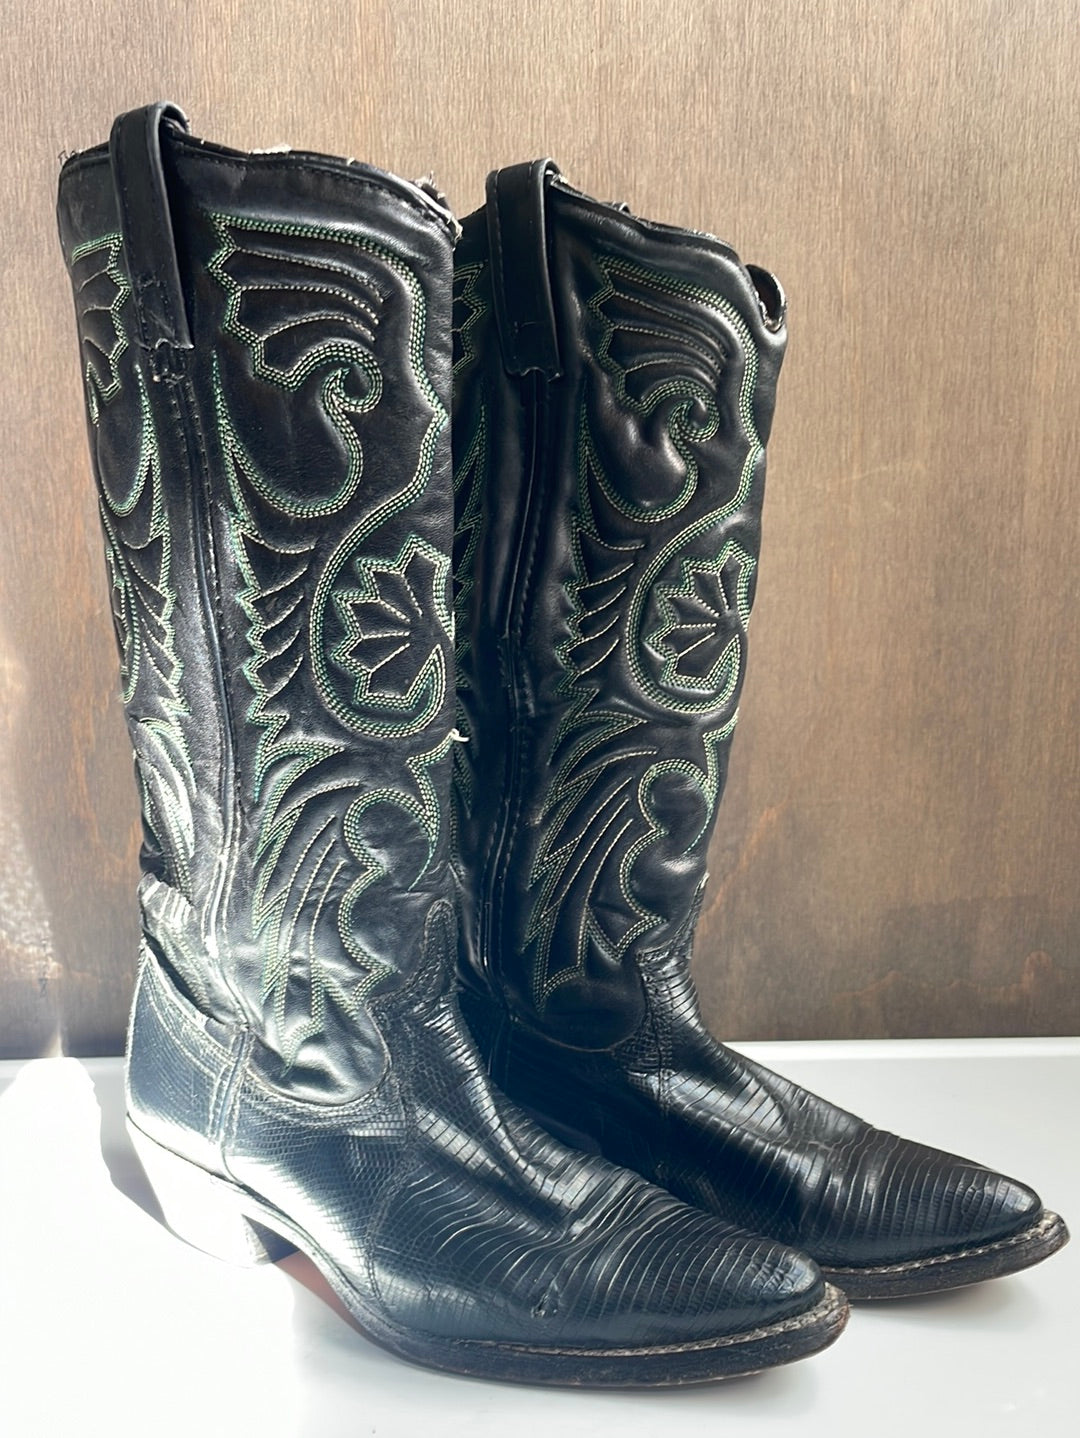 Vintage Acme Black Boots with green